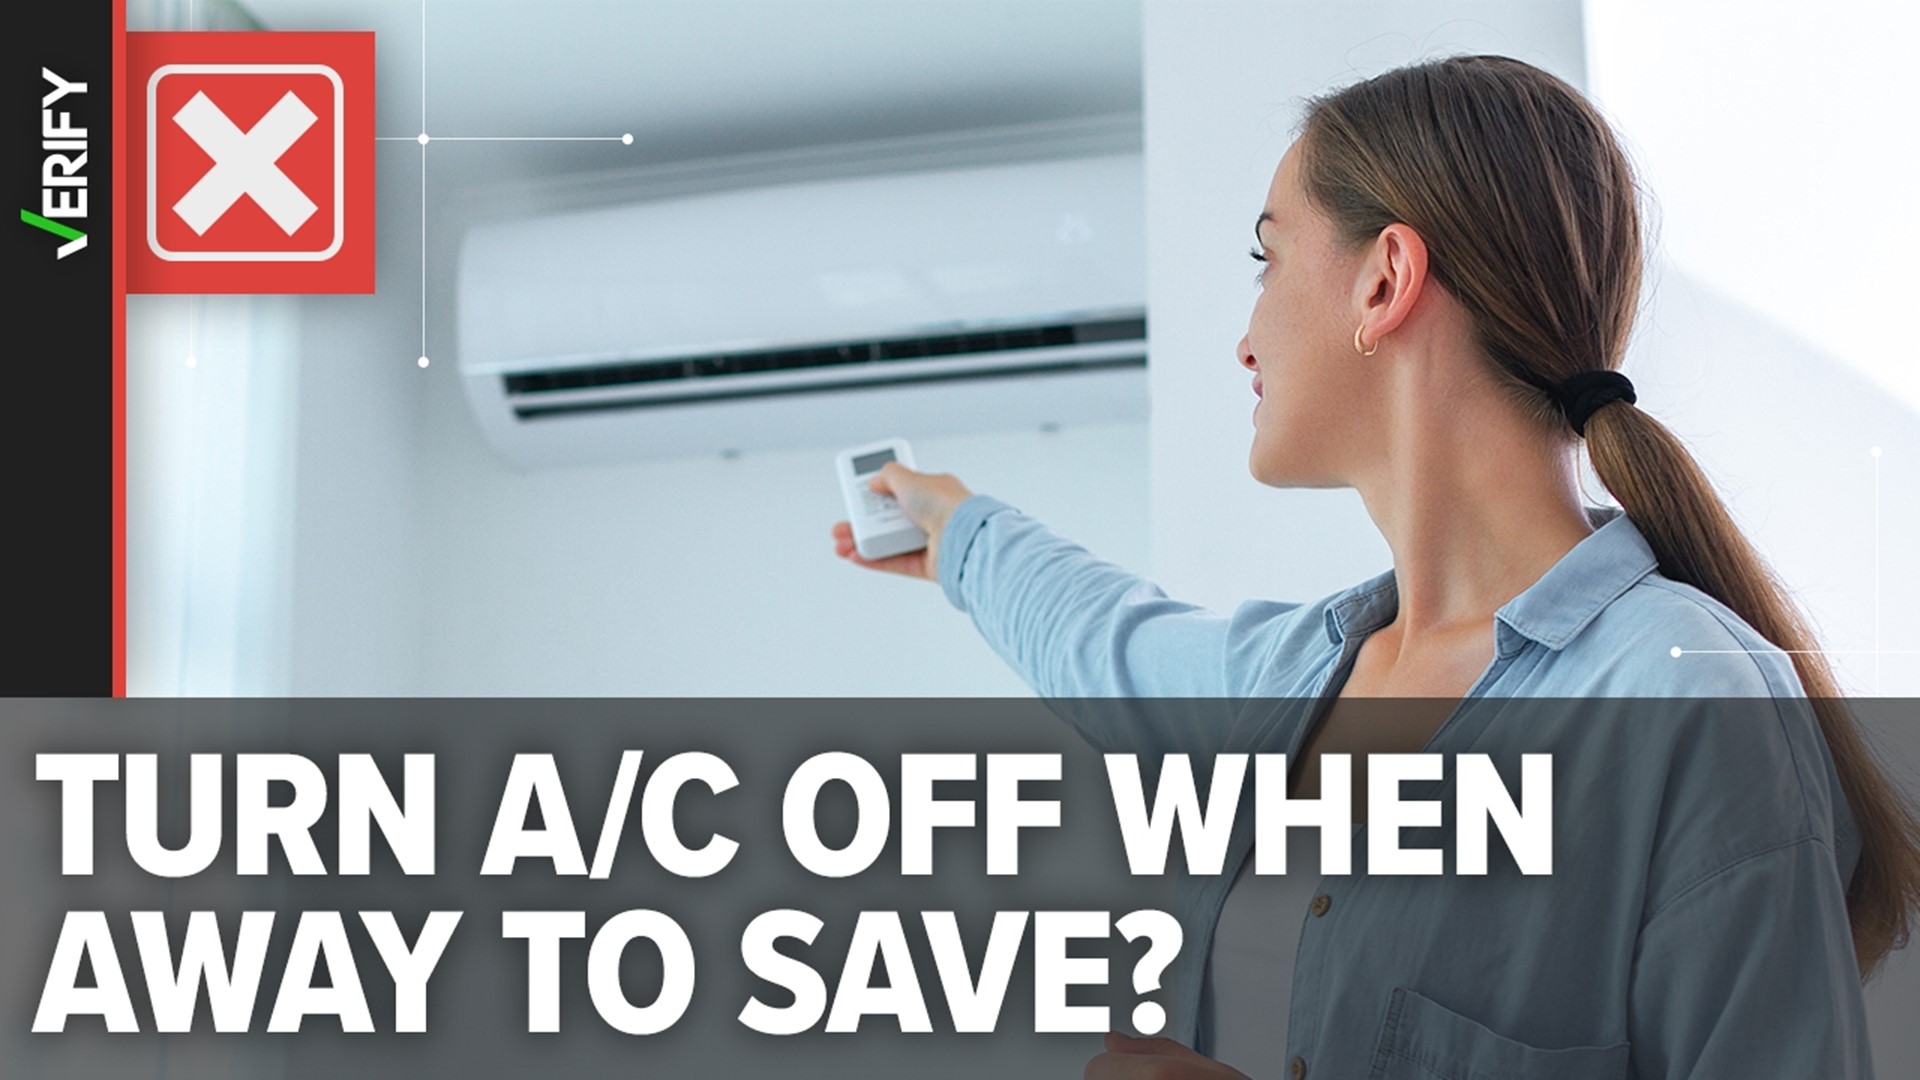 Experts recommend keeping your A/C at one consistent temperature all day during the summer instead of turning it off to avoid putting additional strain on the unit.